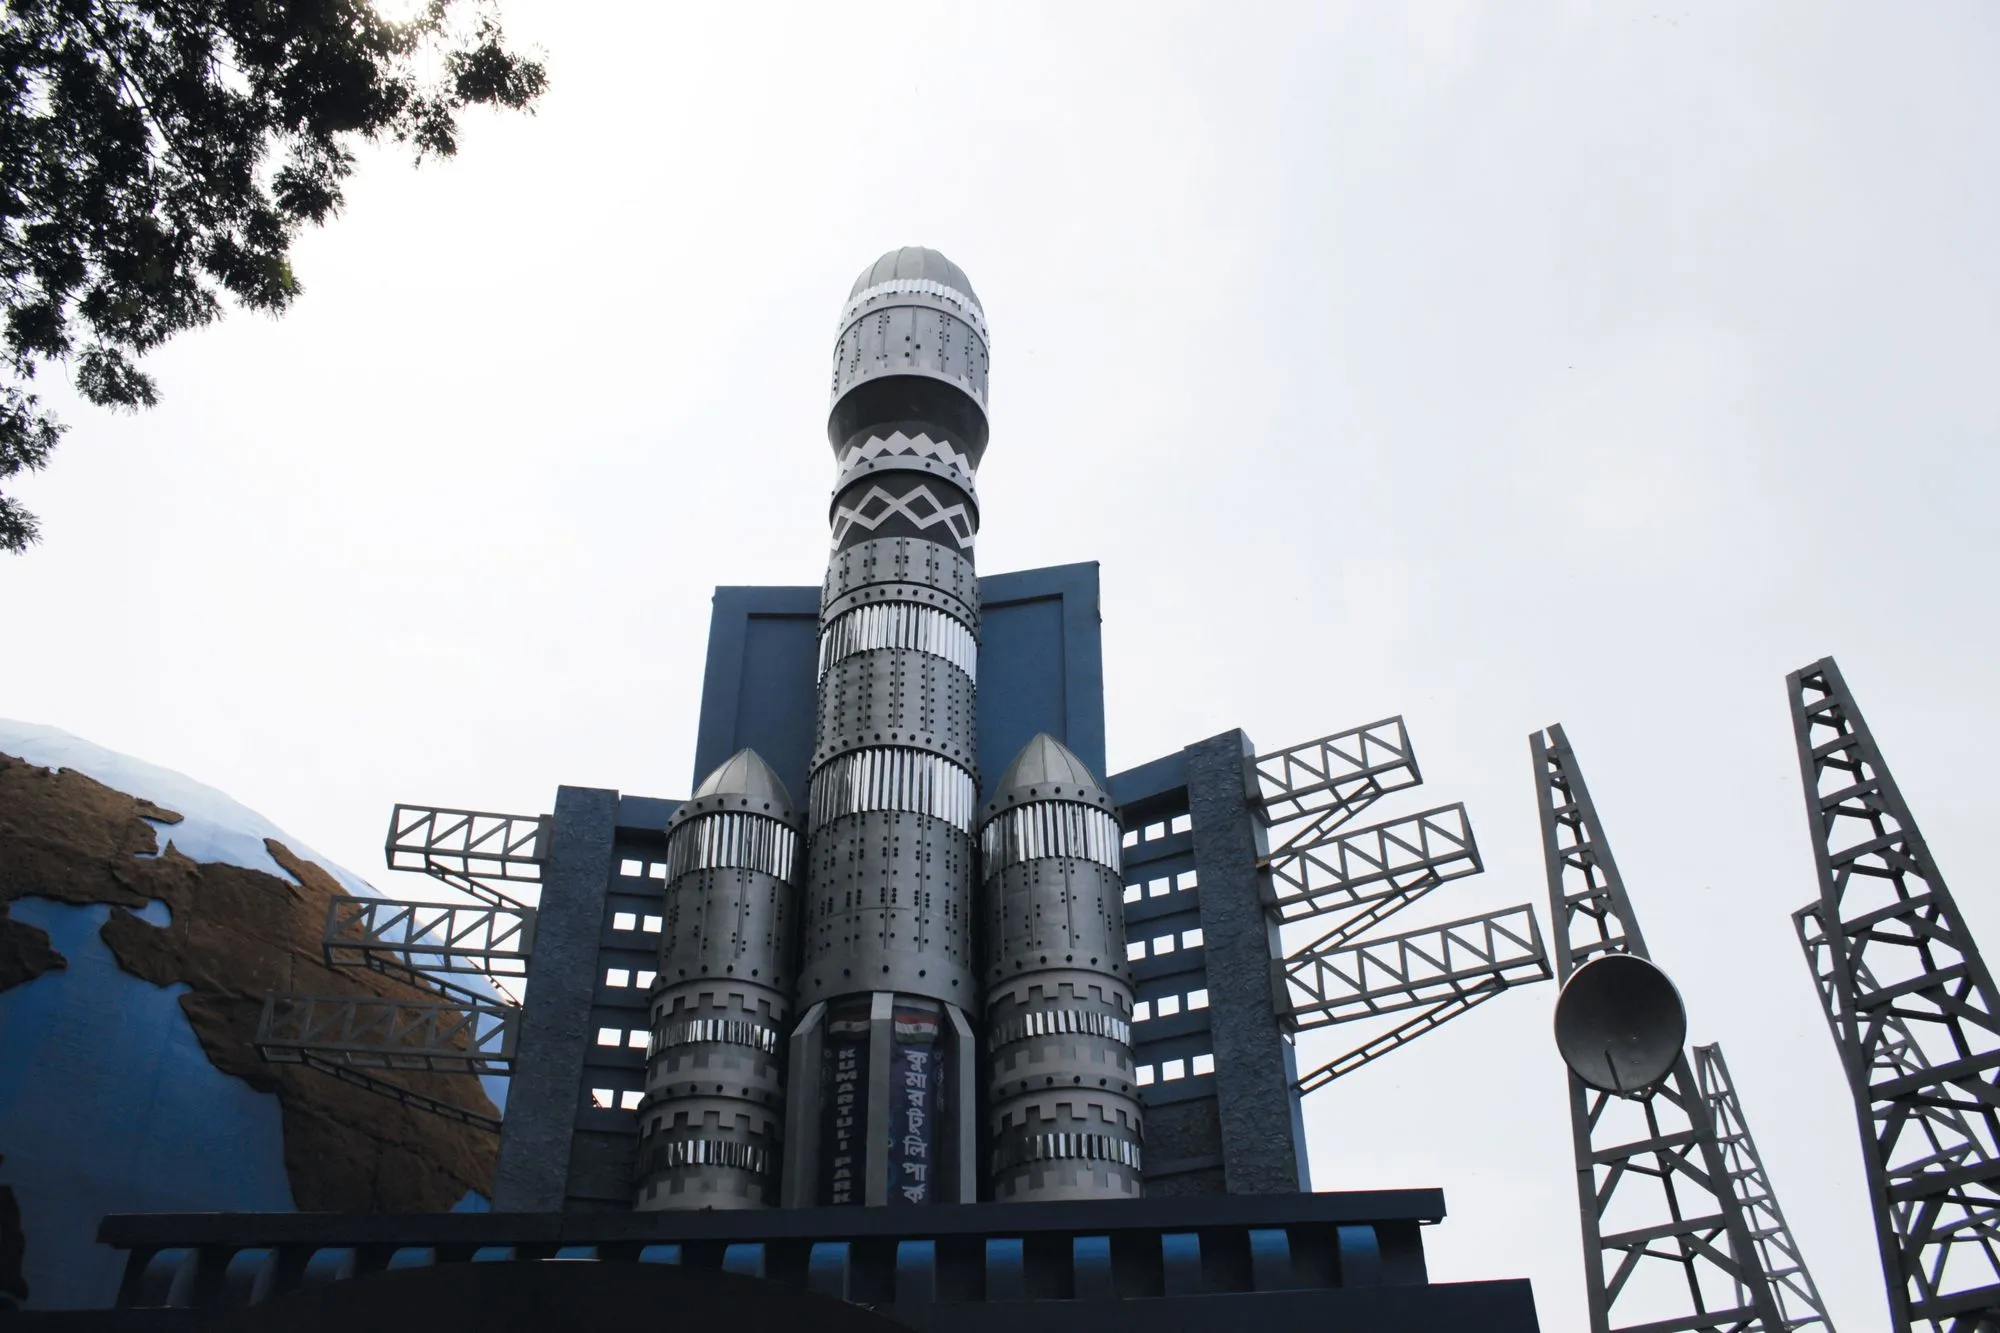 Space Rocket and towers theme during Durga Puja Festival, India, 2019.